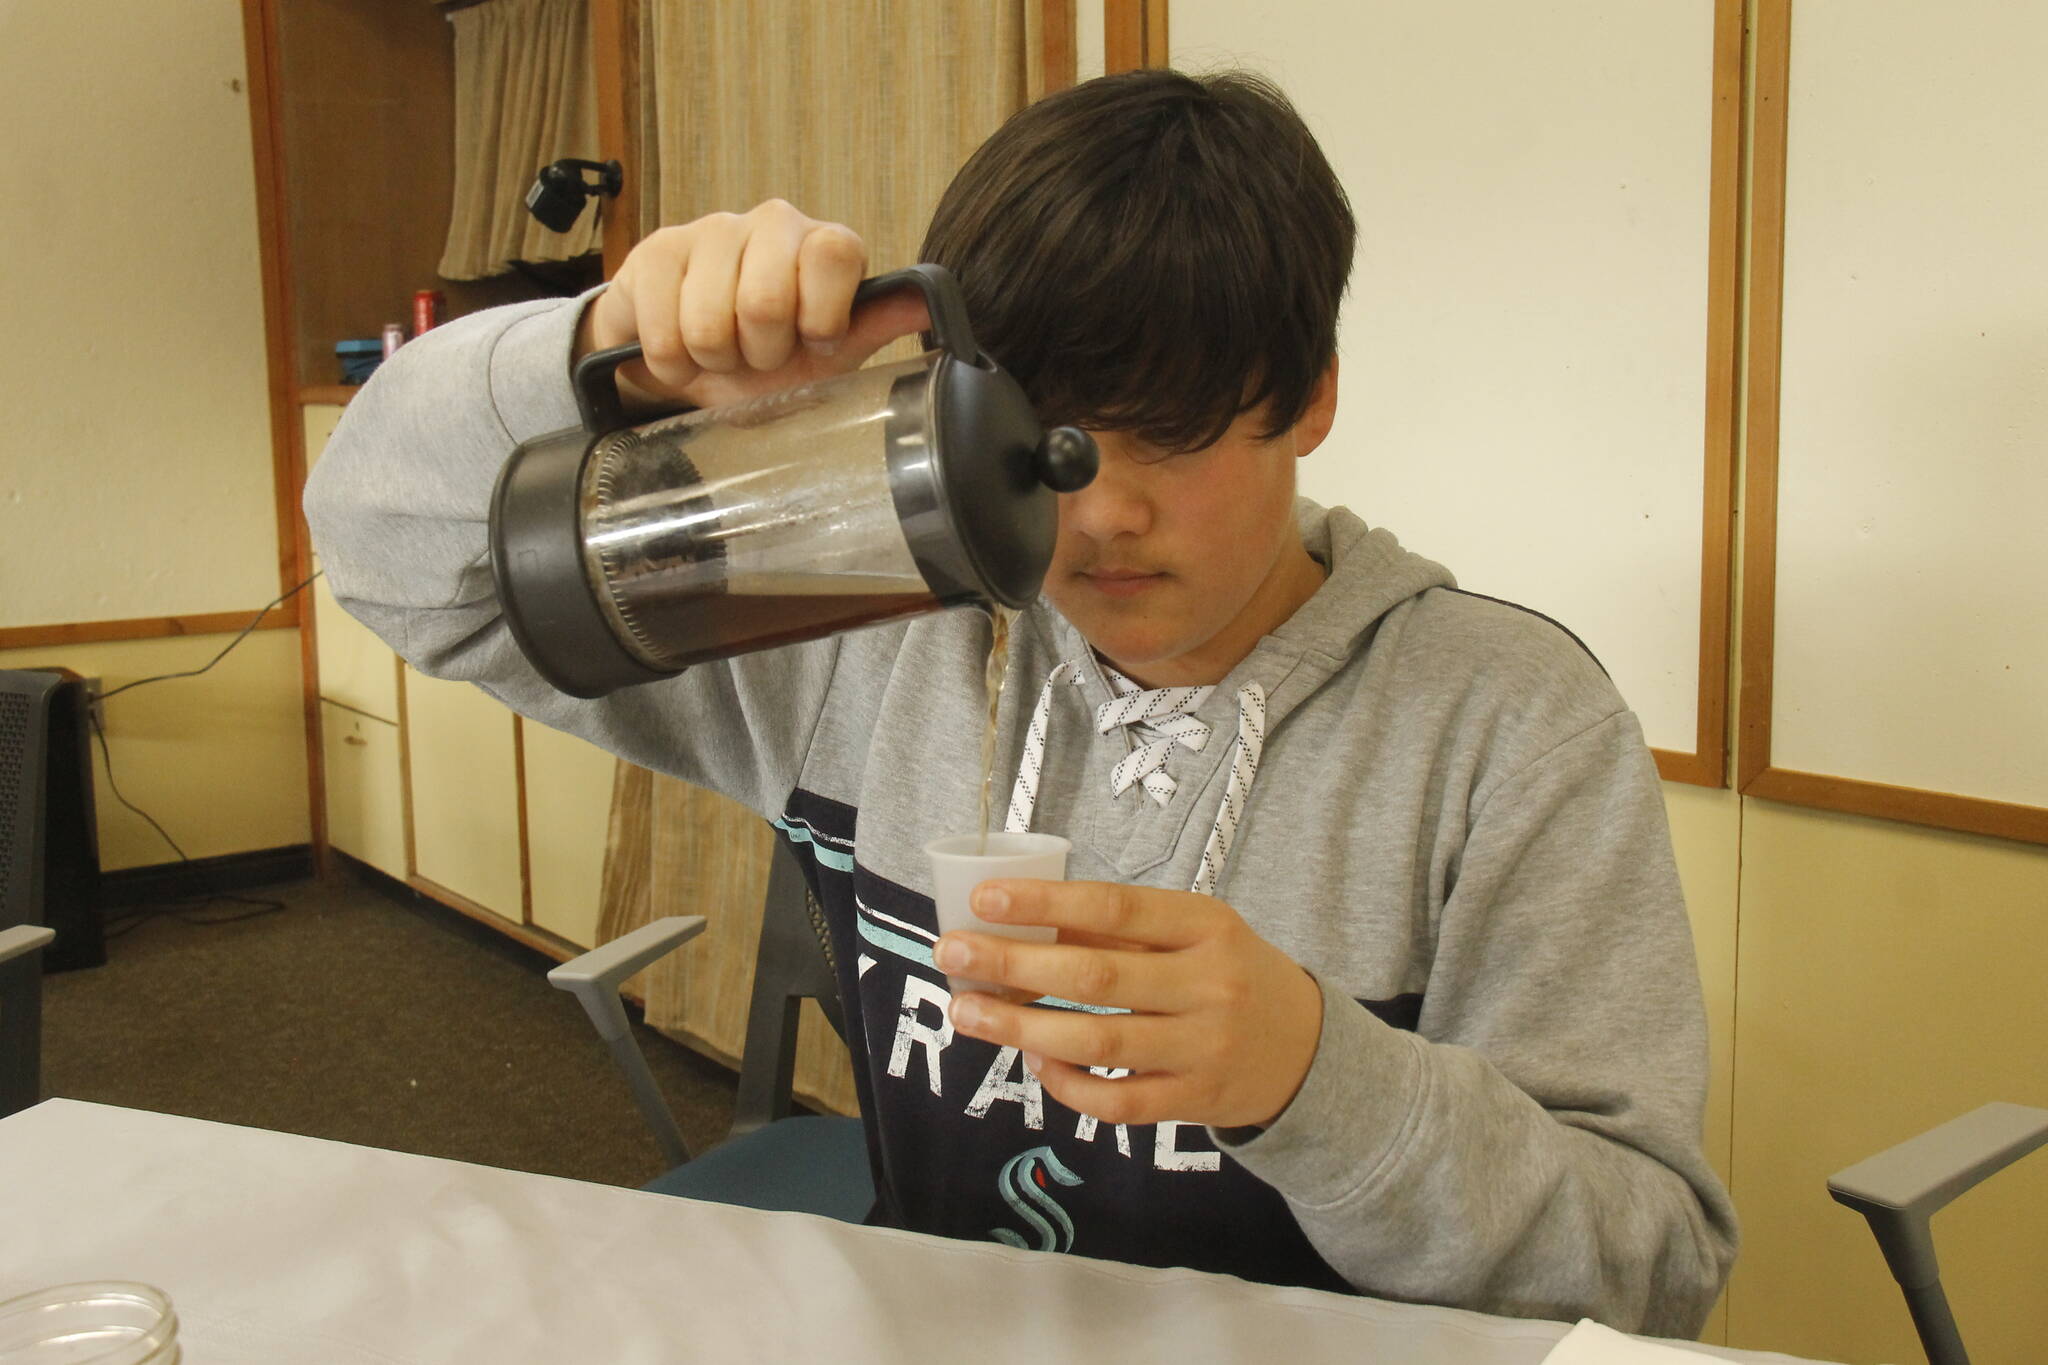 Ninth grader Liam Akhtar pours a tea of elderberry, chamomile and tulsi that he brewed. (Photo by Kira Erickson/South Whidbey Record)